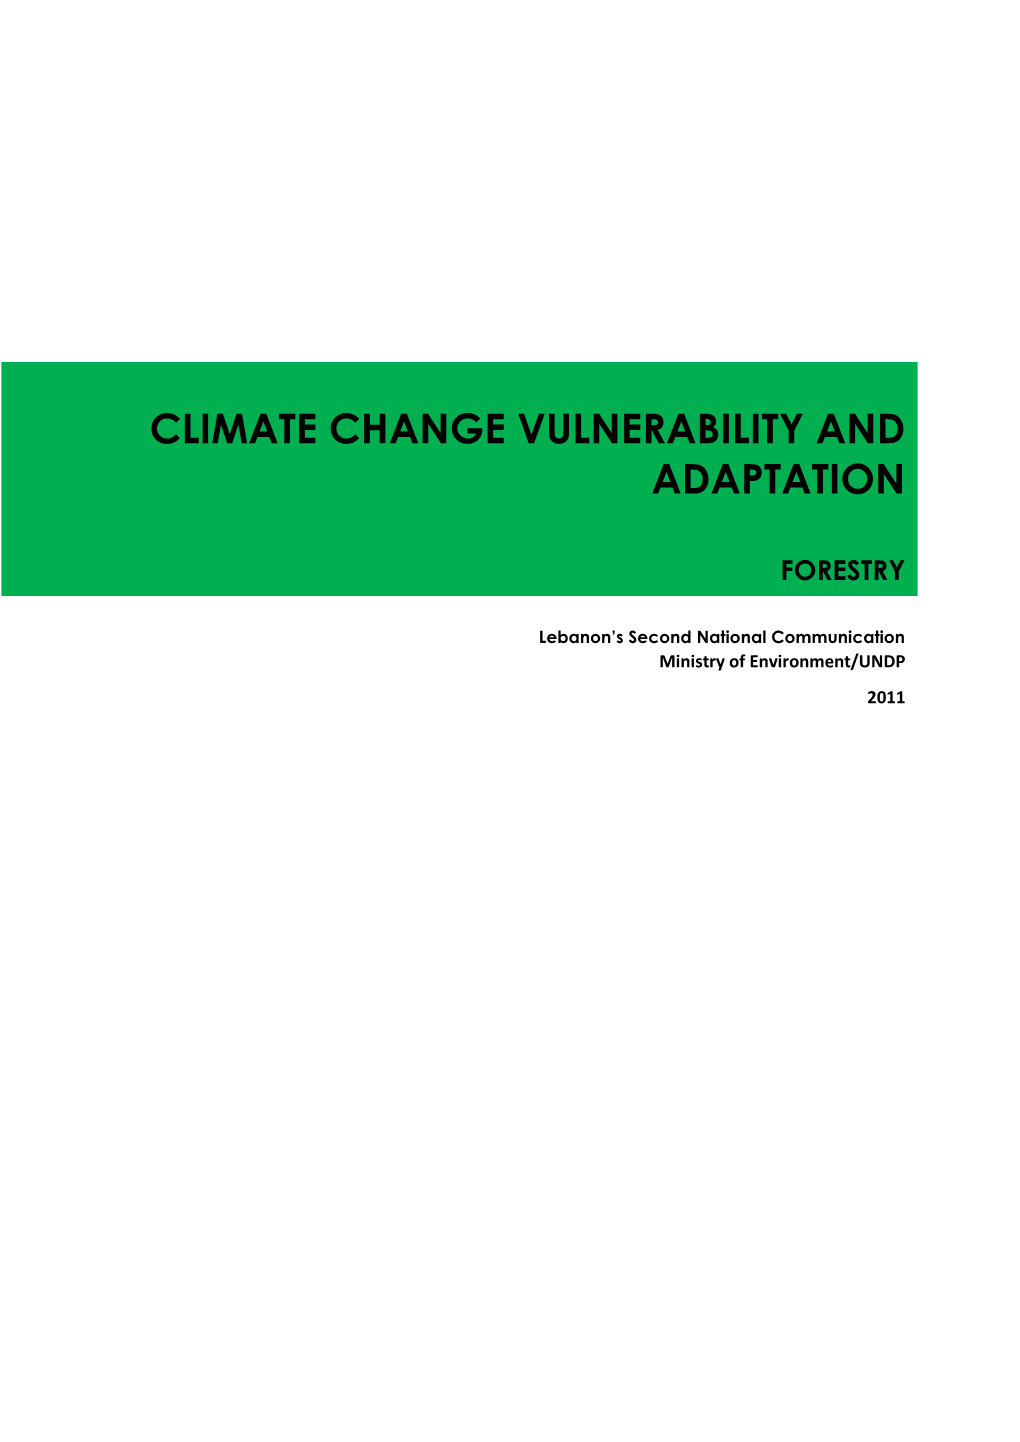 Climate Change VULNERABILITY and ADAPTATION of the FORESTRY